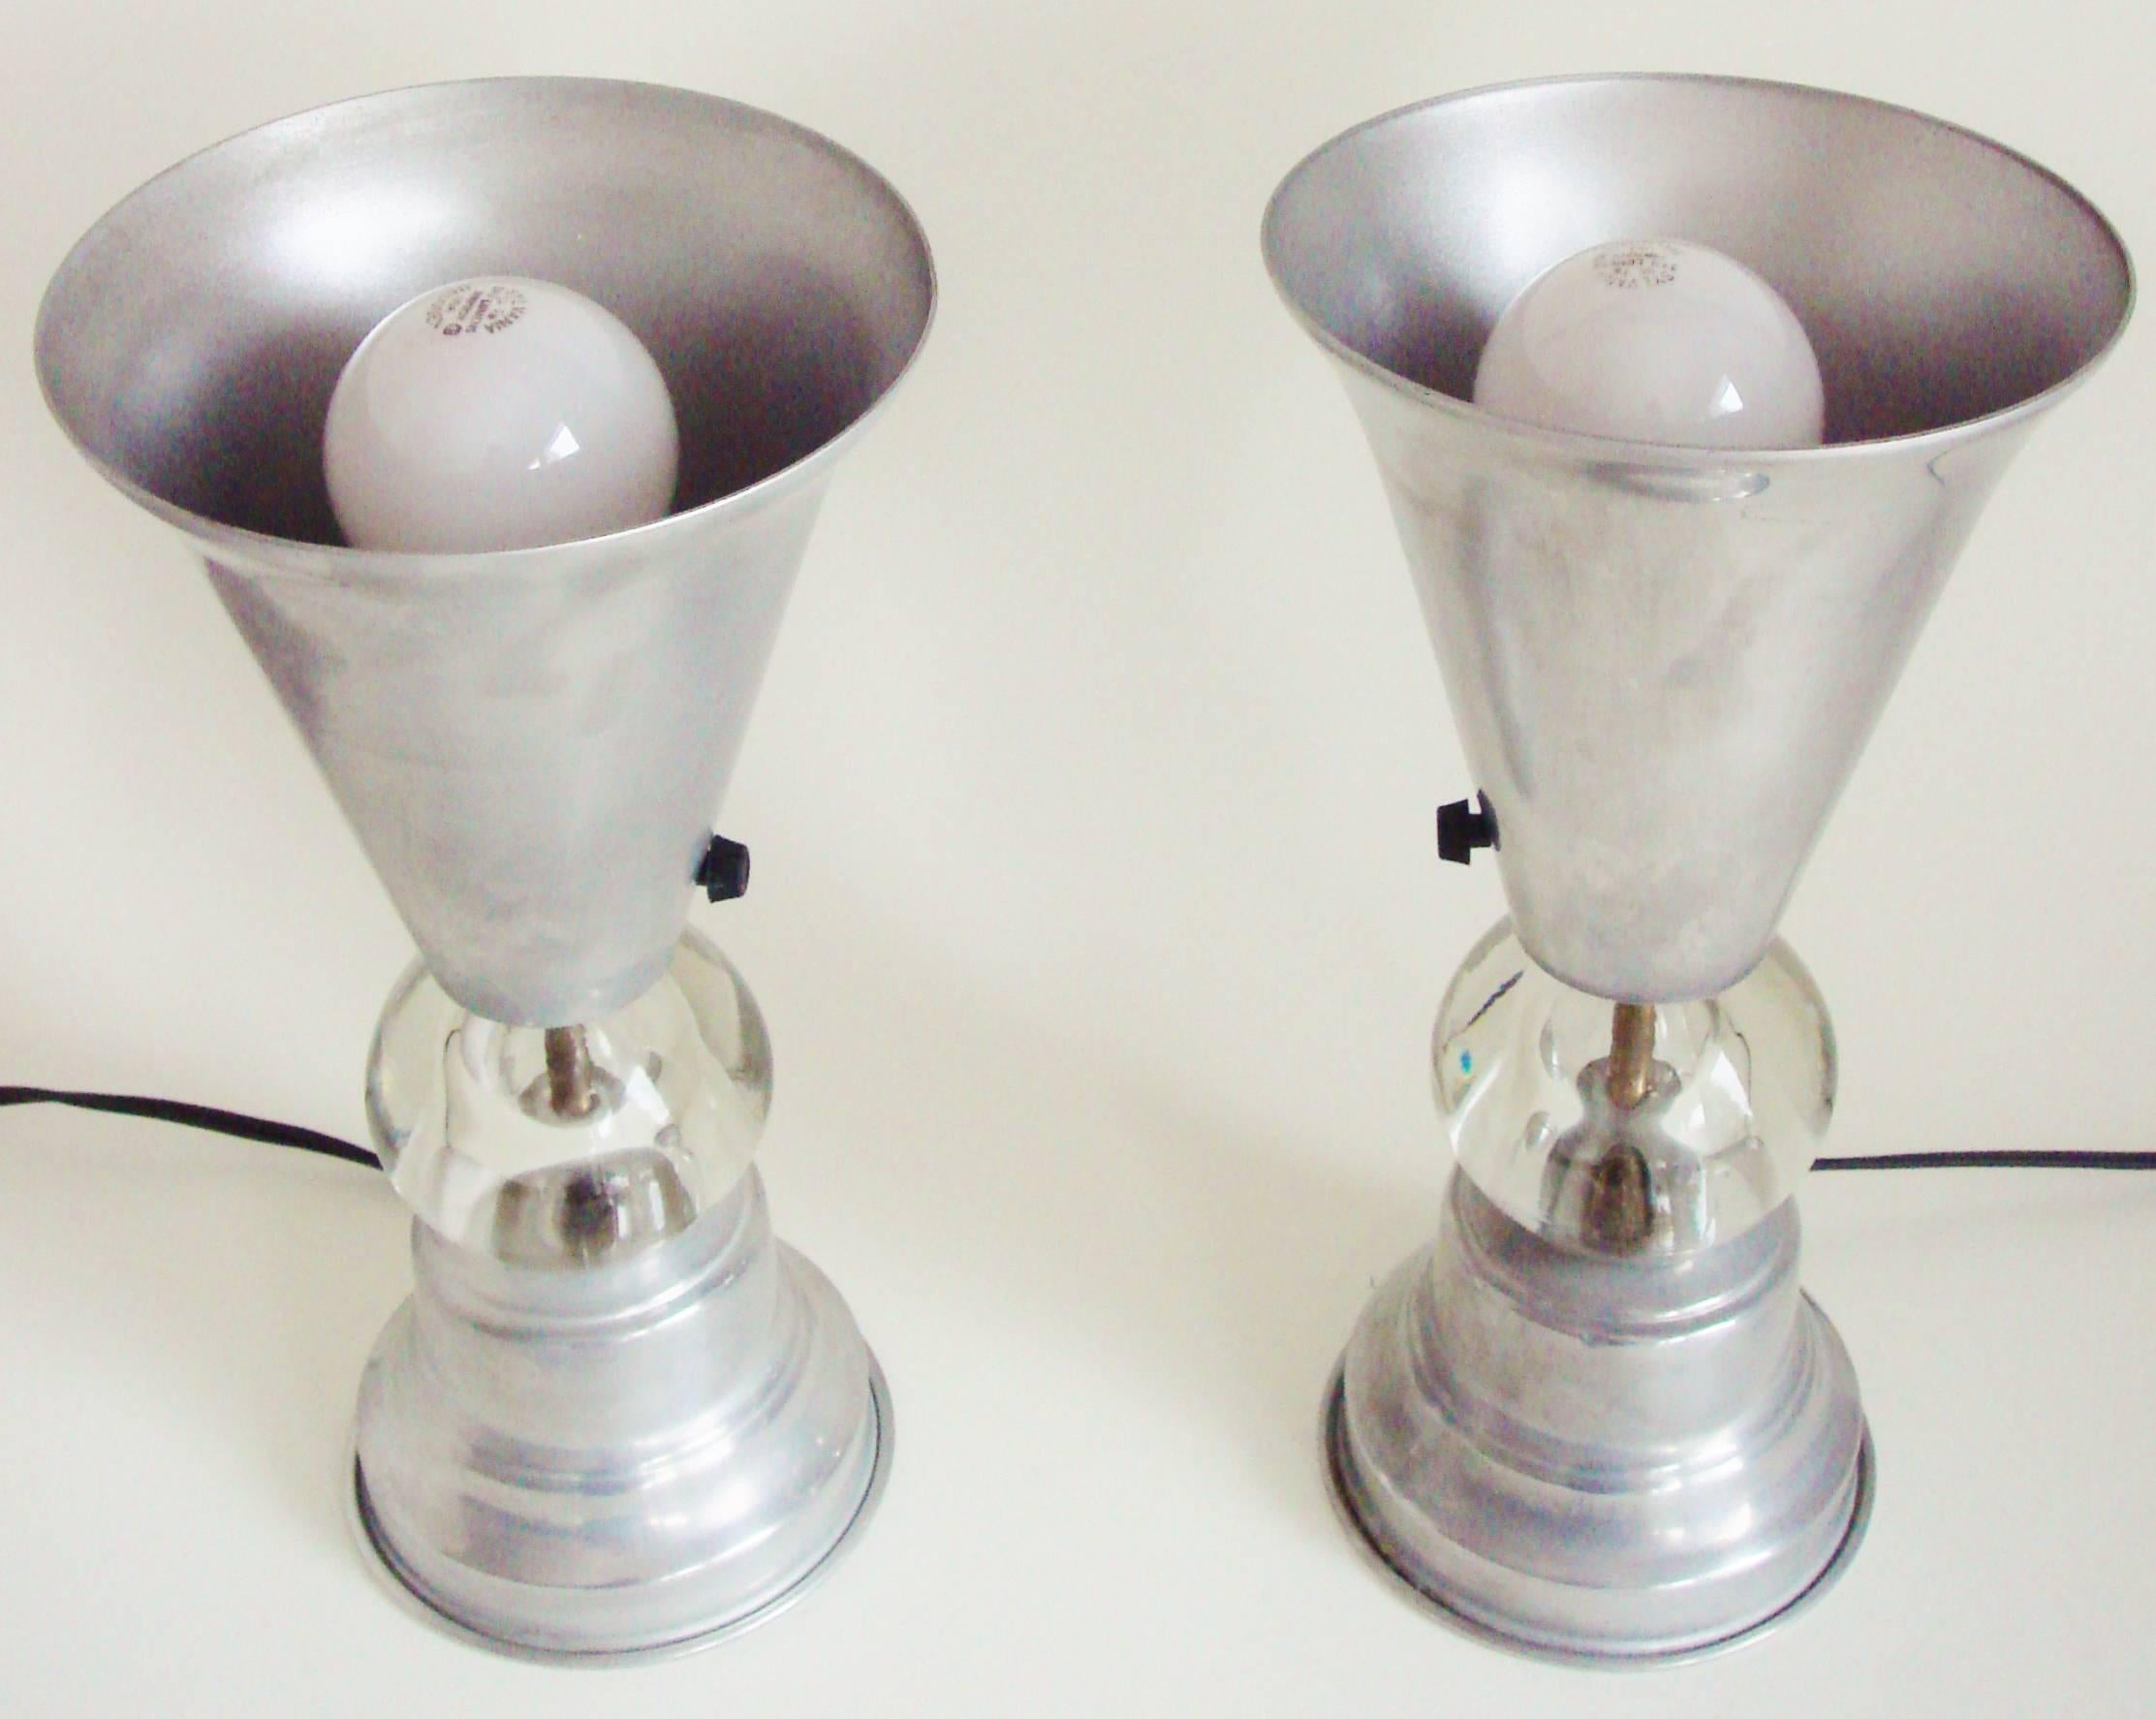 Pair of American Art Deco/Machine Age Aluminum and Glass Tabletop Torchieres In Good Condition For Sale In Port Hope, ON